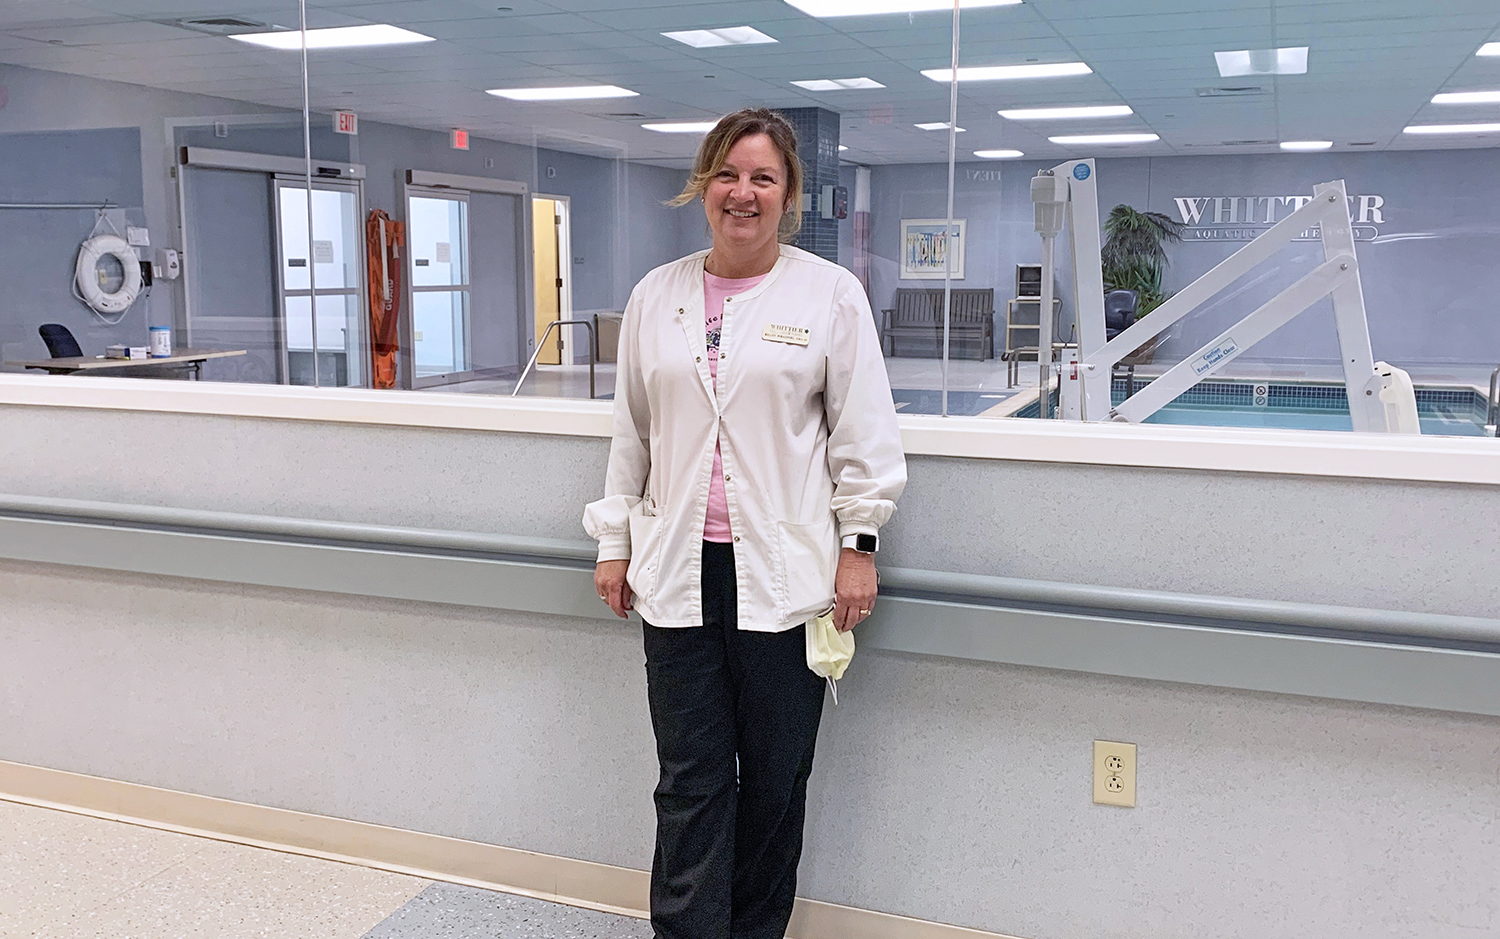 A Conversation with Kelley Porazinski, OTR/L Staff @ Bradford Rehabilitation Hospital- “I love knowing I can make a difference on such a higher level.”